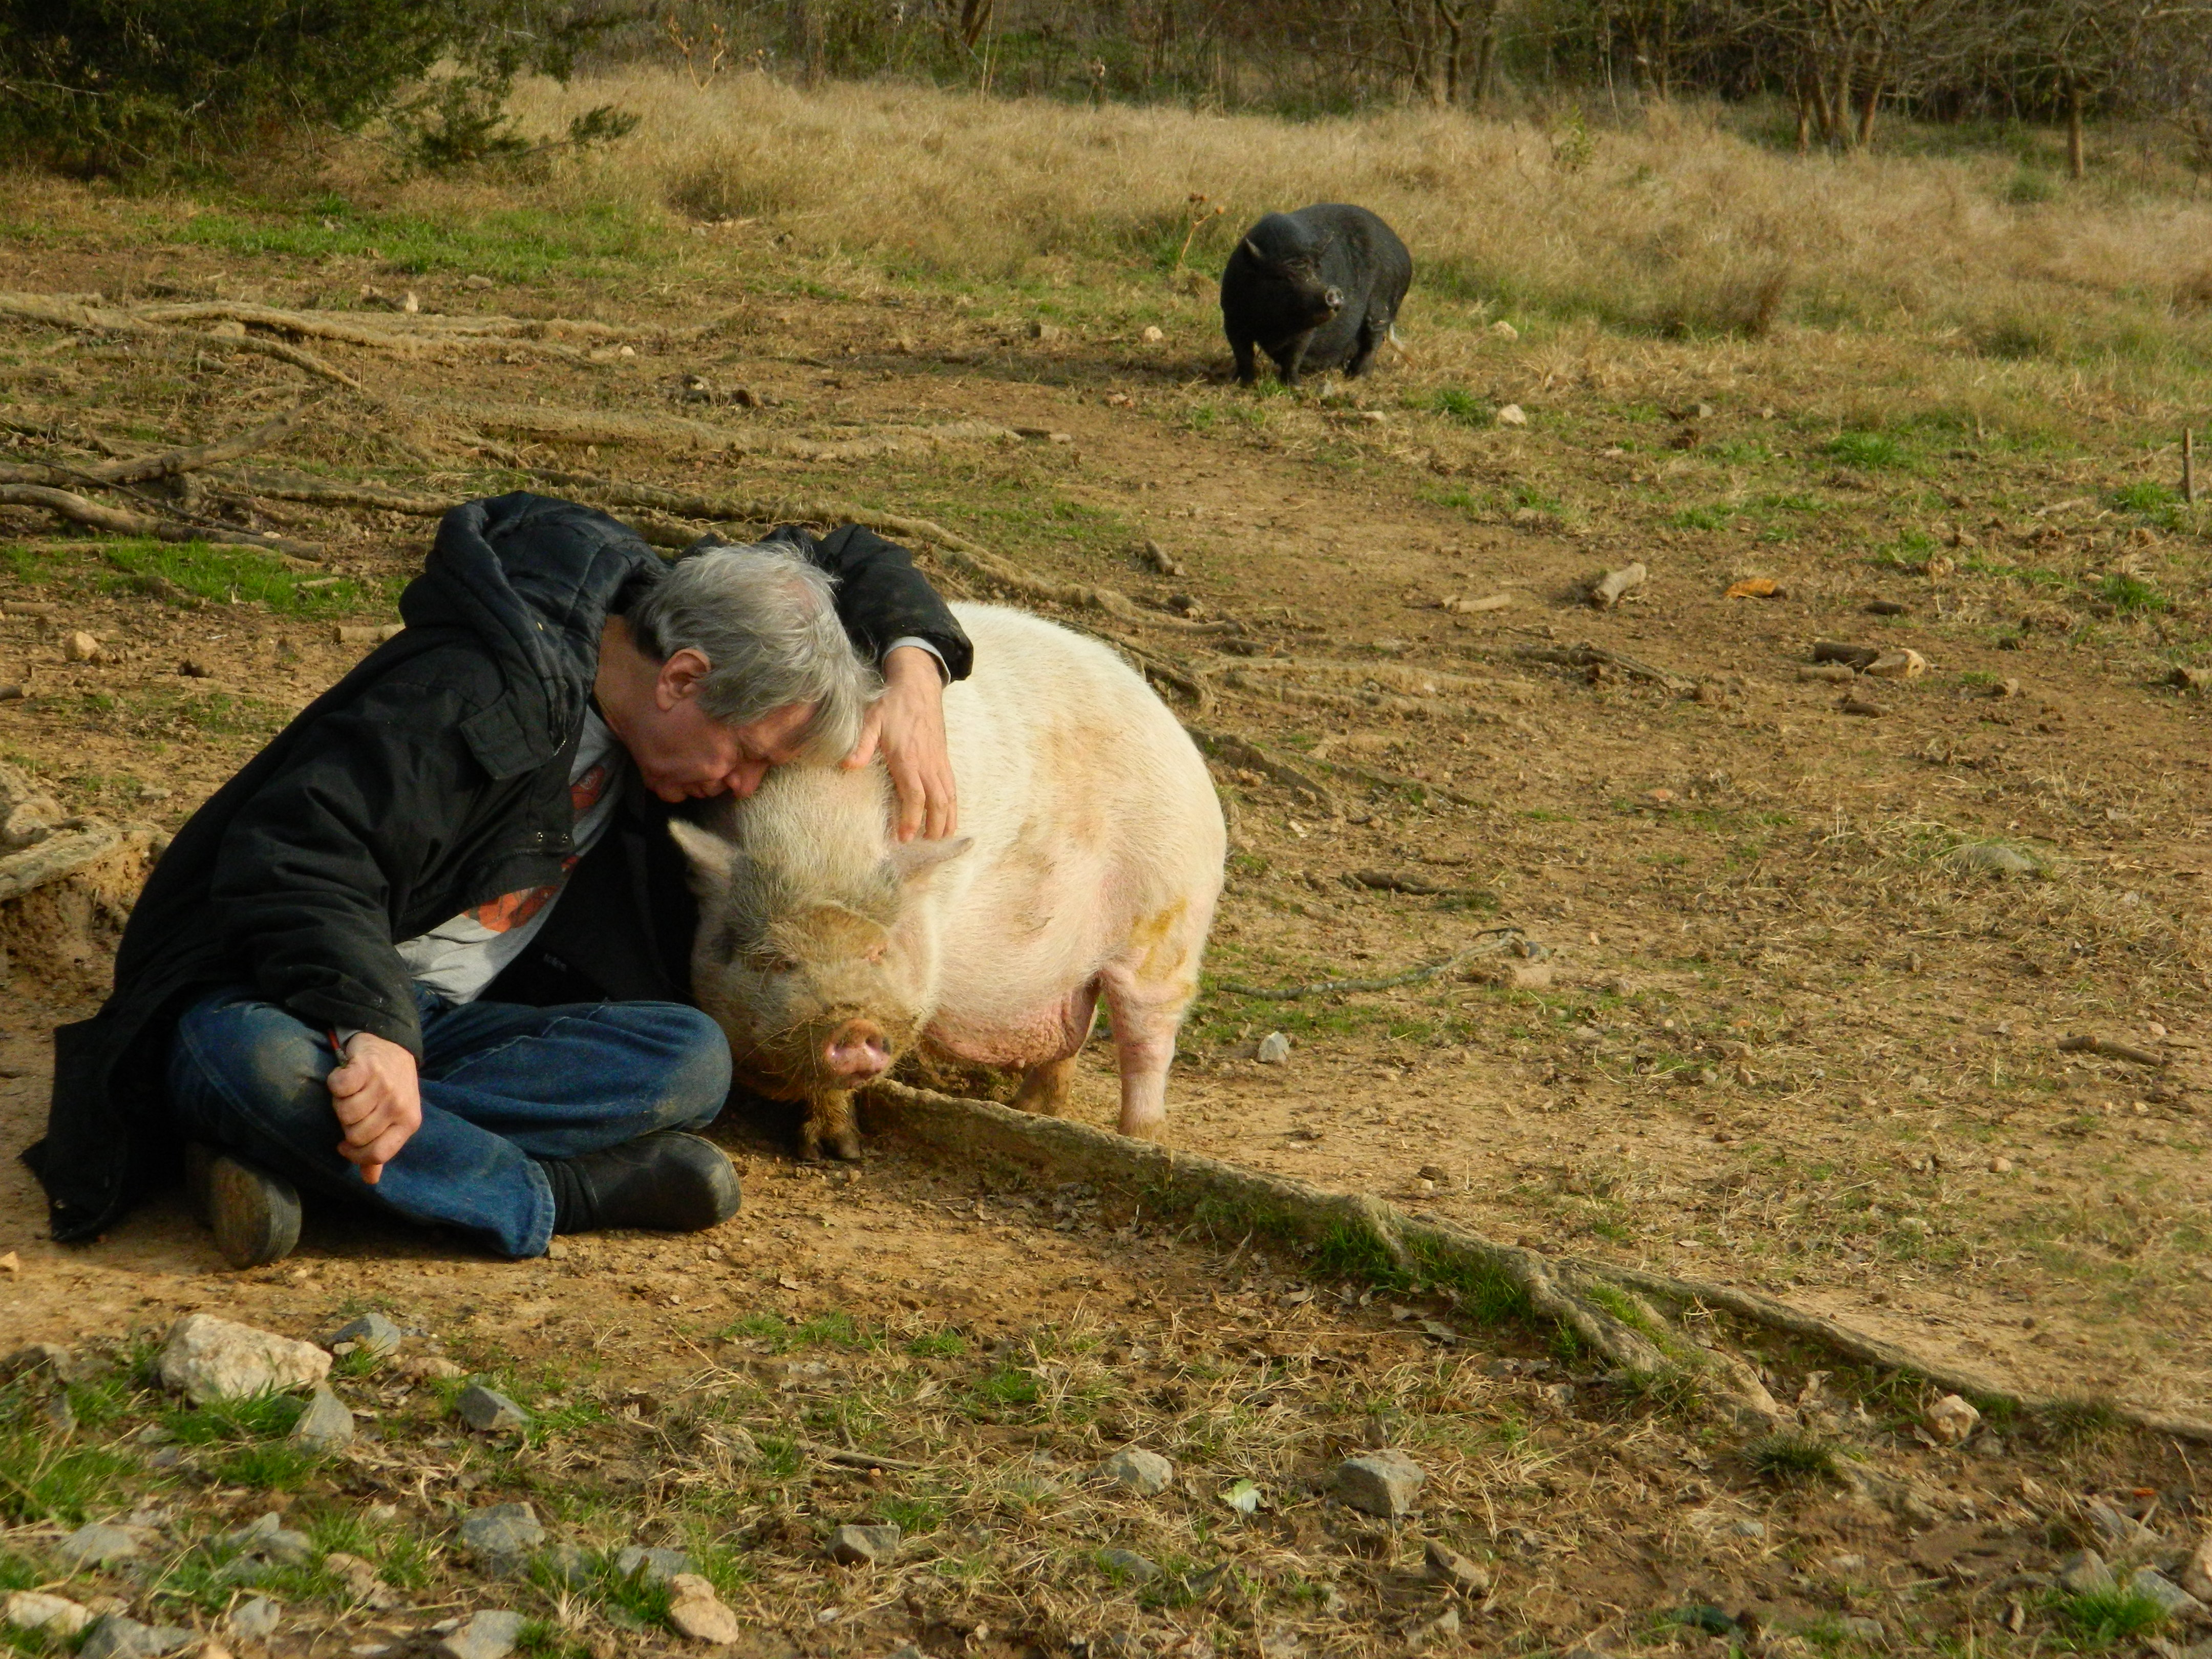 One of our guests, Ethan, is truly a pig whisperer!!